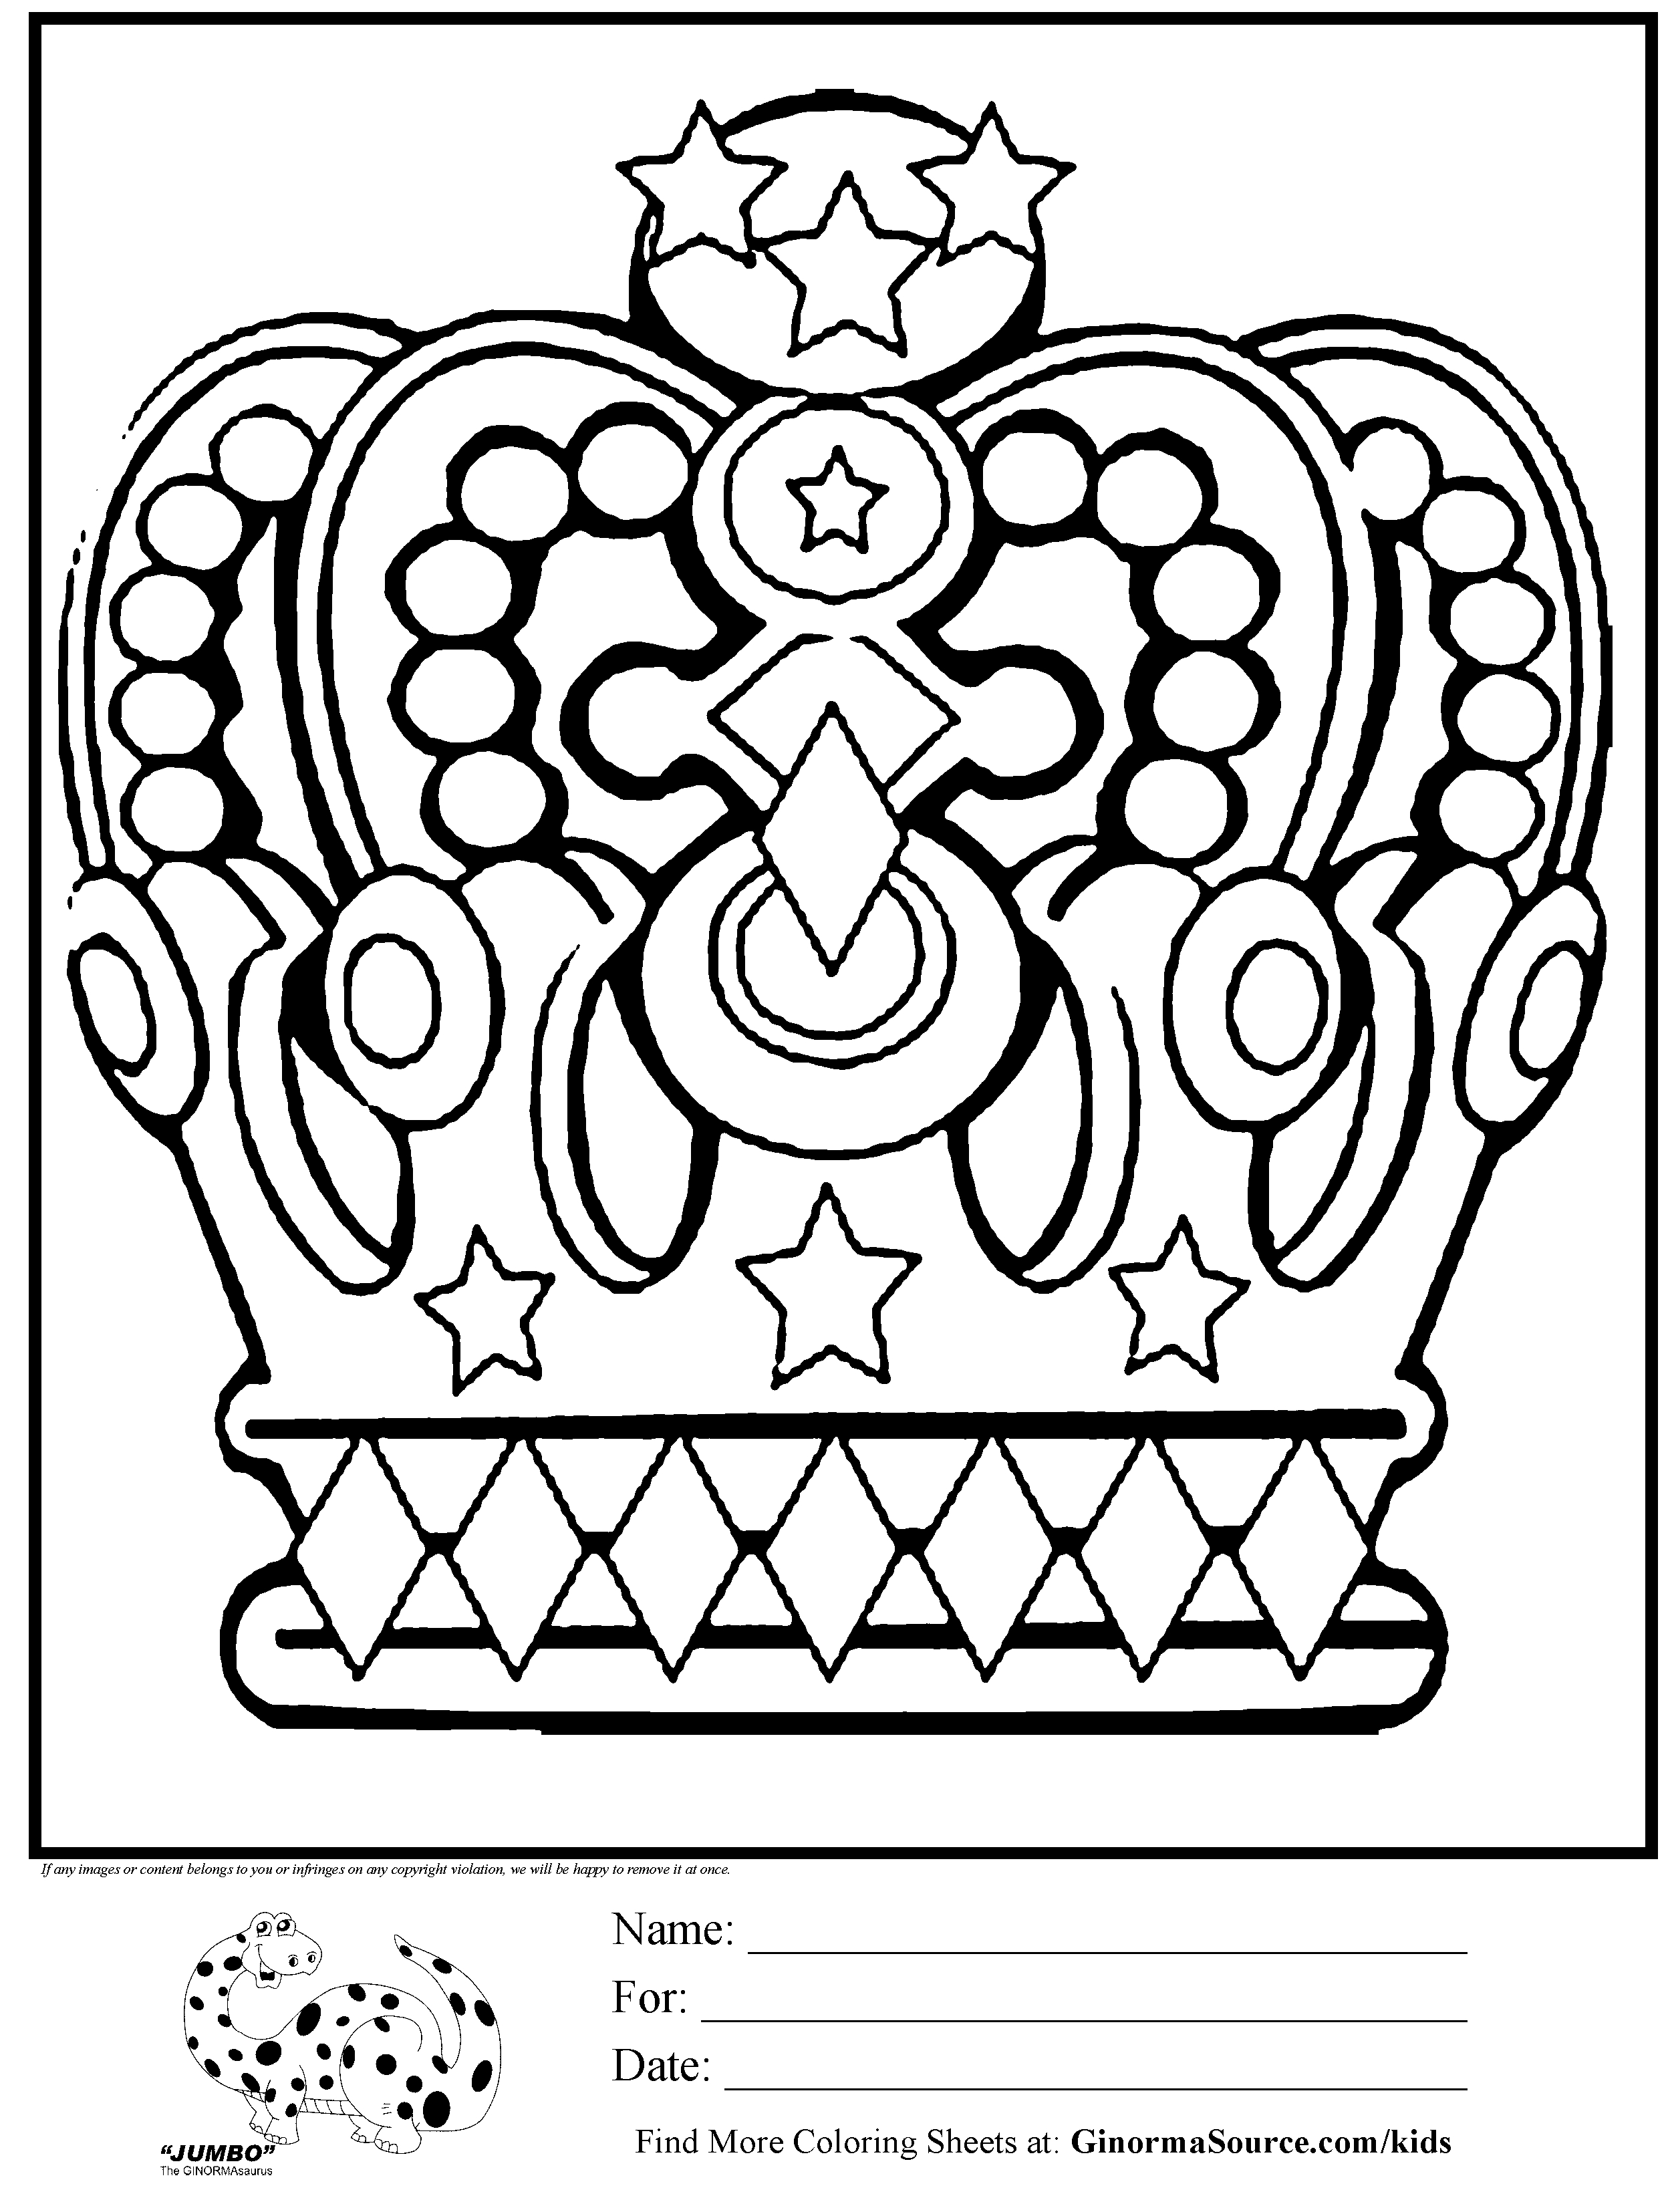 Queen Crown Coloring Page at GetColorings.com | Free printable